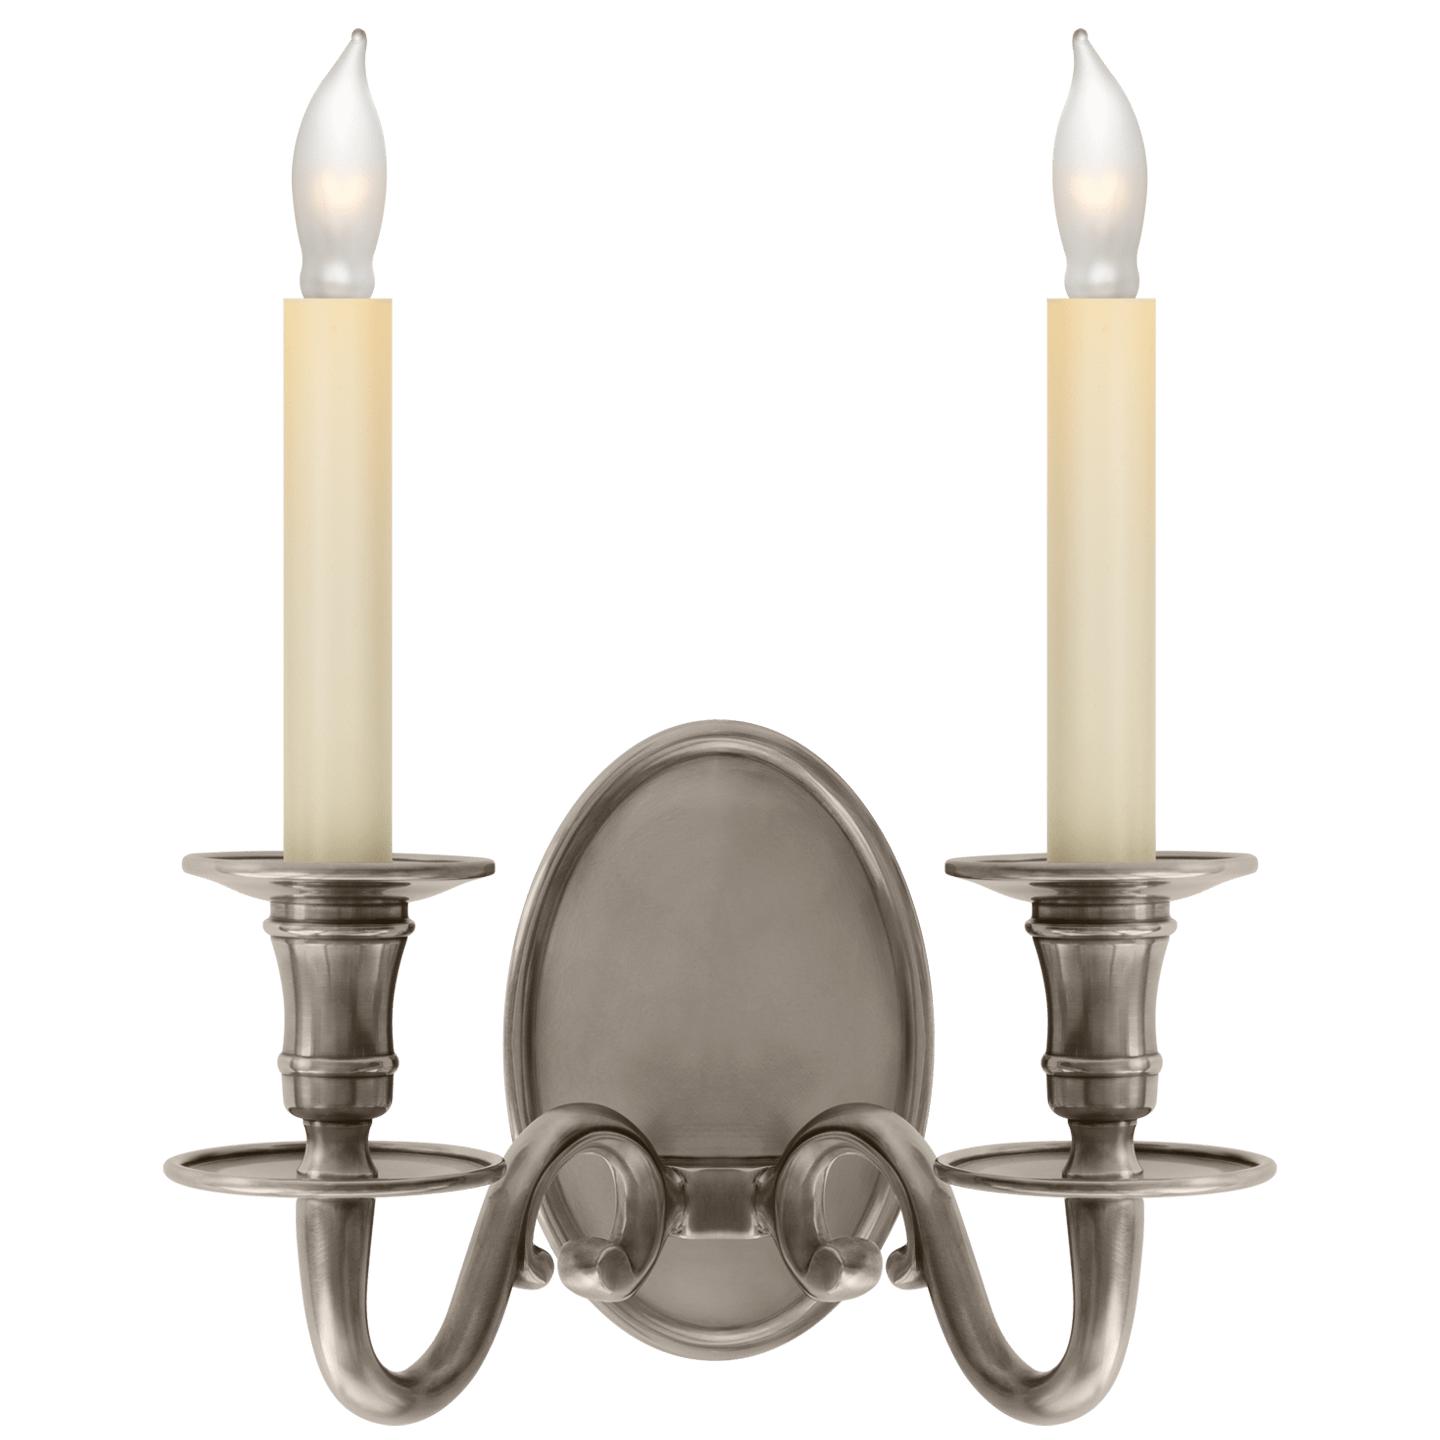 Antique Nickel CHS109S Shade Sold Separately